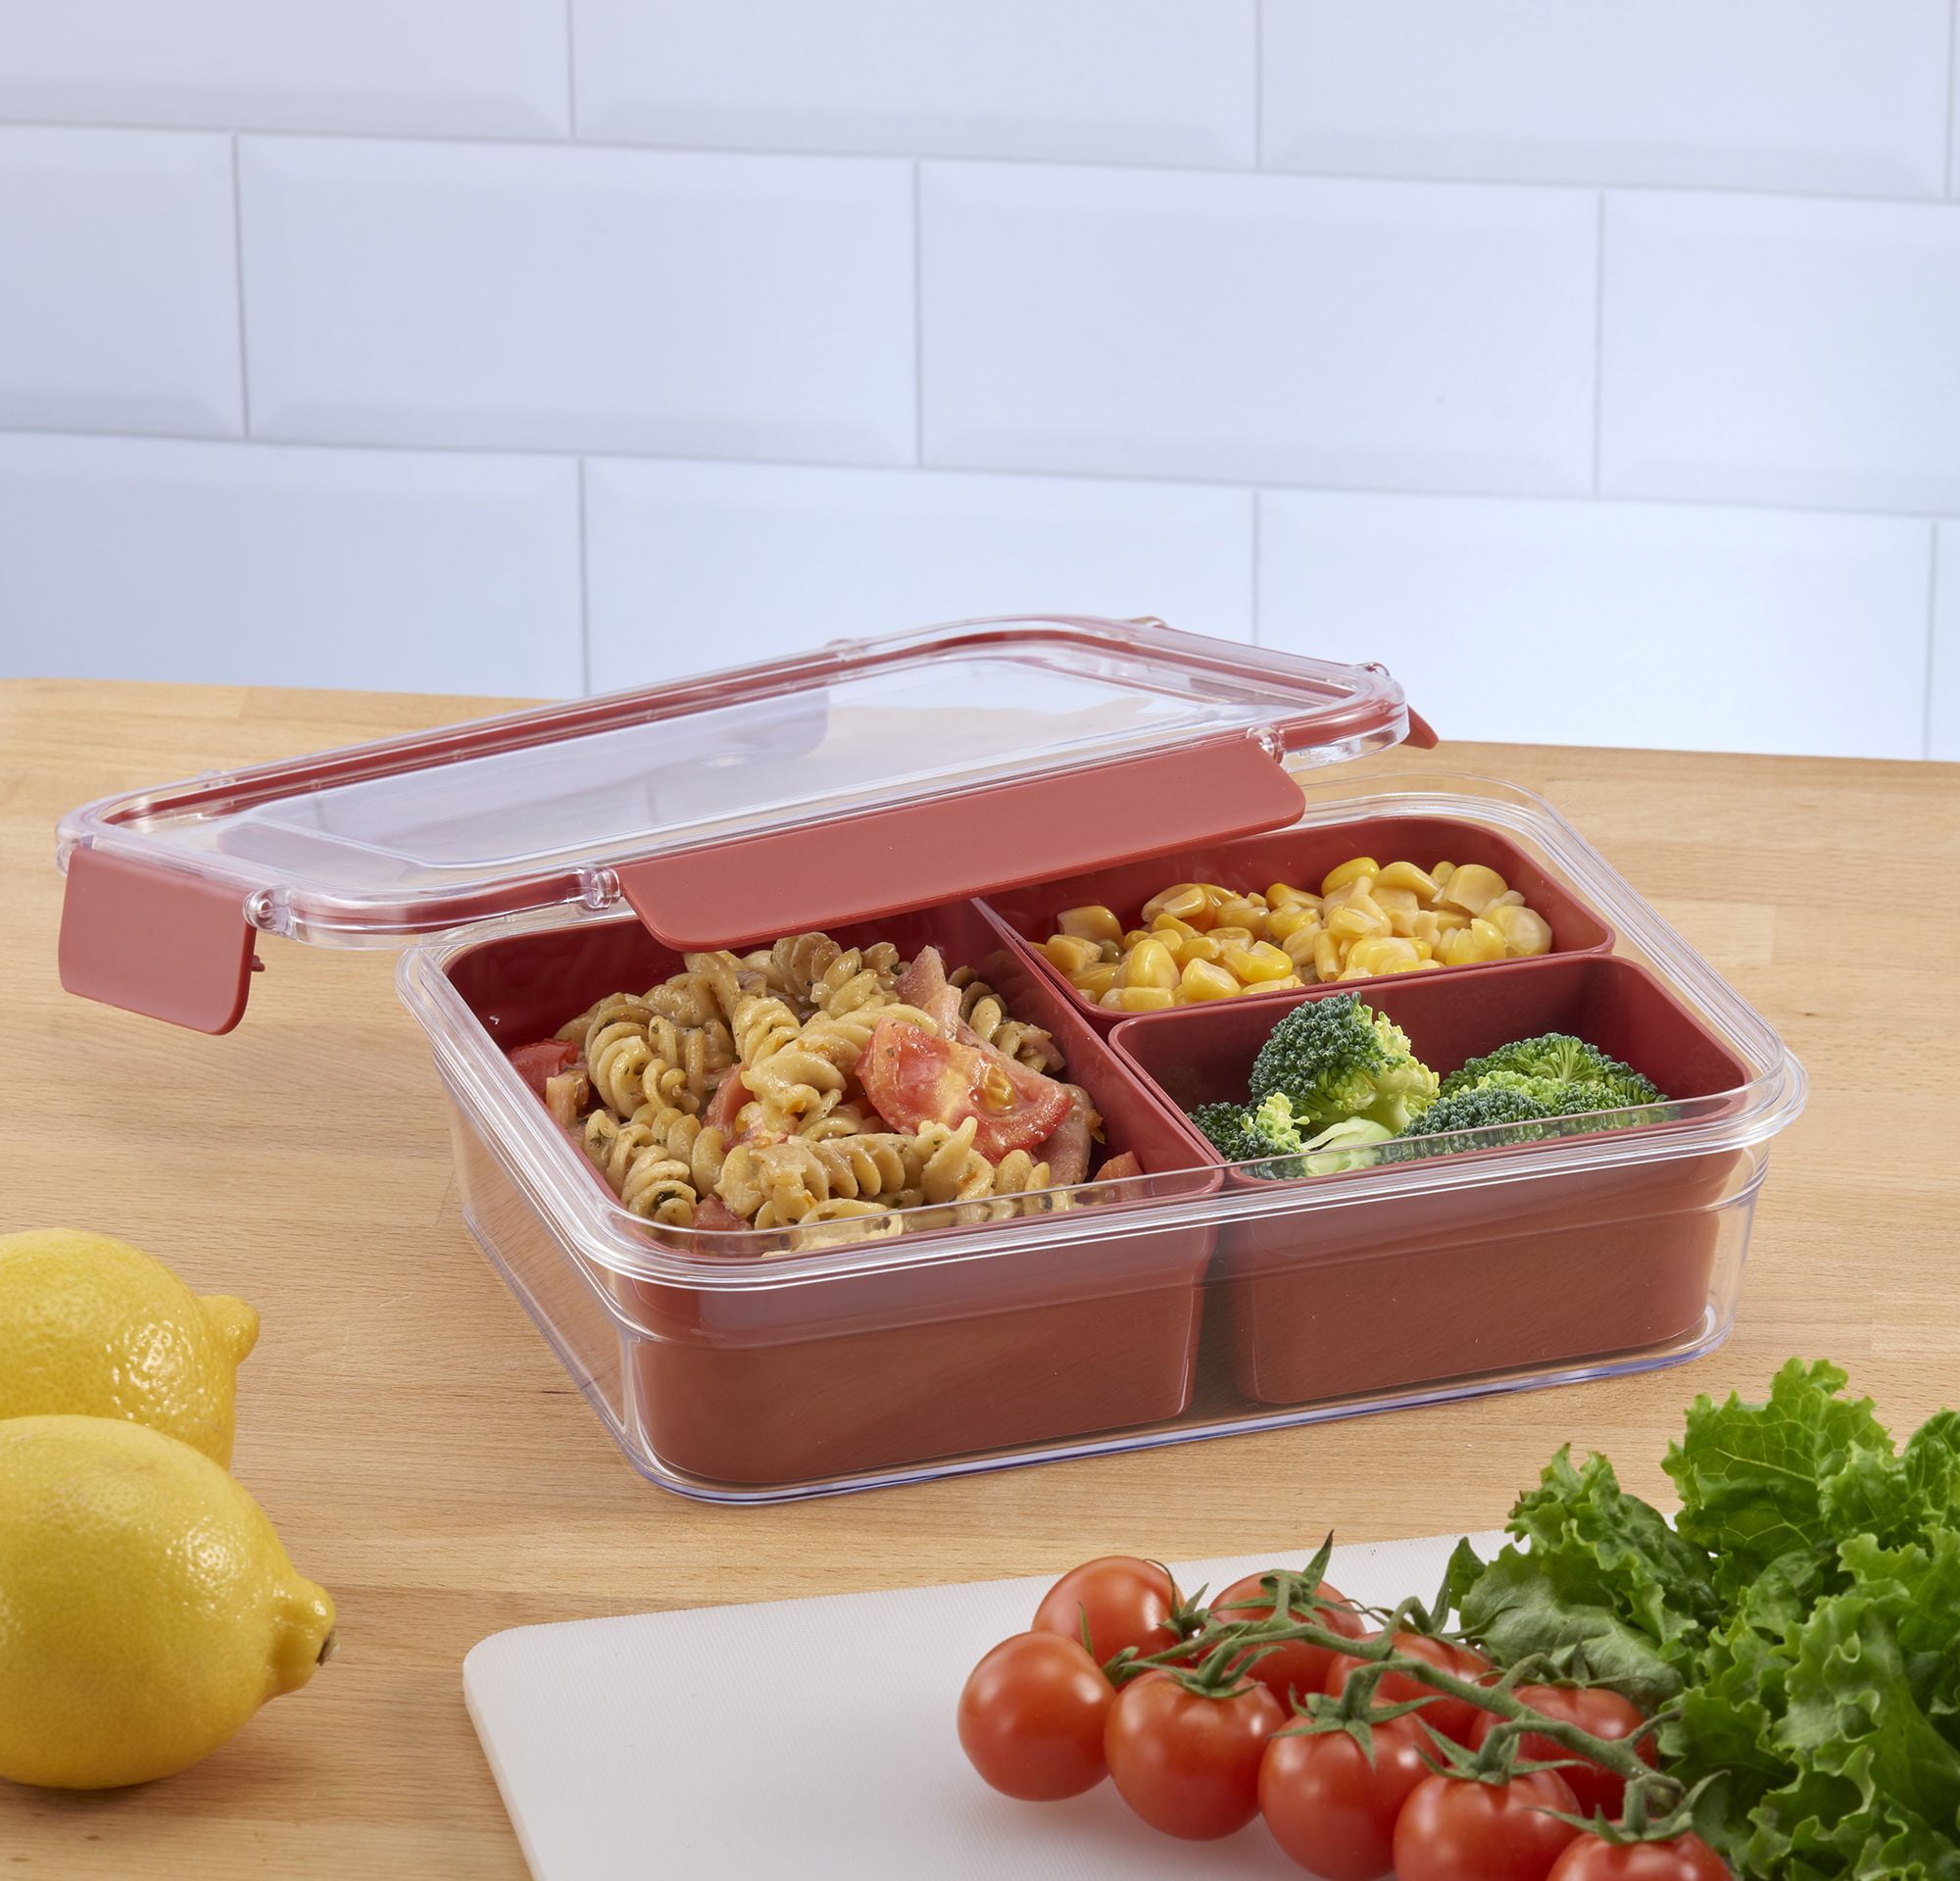 Dww-lunch Box With 3 Compartments, Salad Lunch Box For Adults/kids,  Leakproof Bento Box, Microwavable, Bpa Free Red, 1500ml